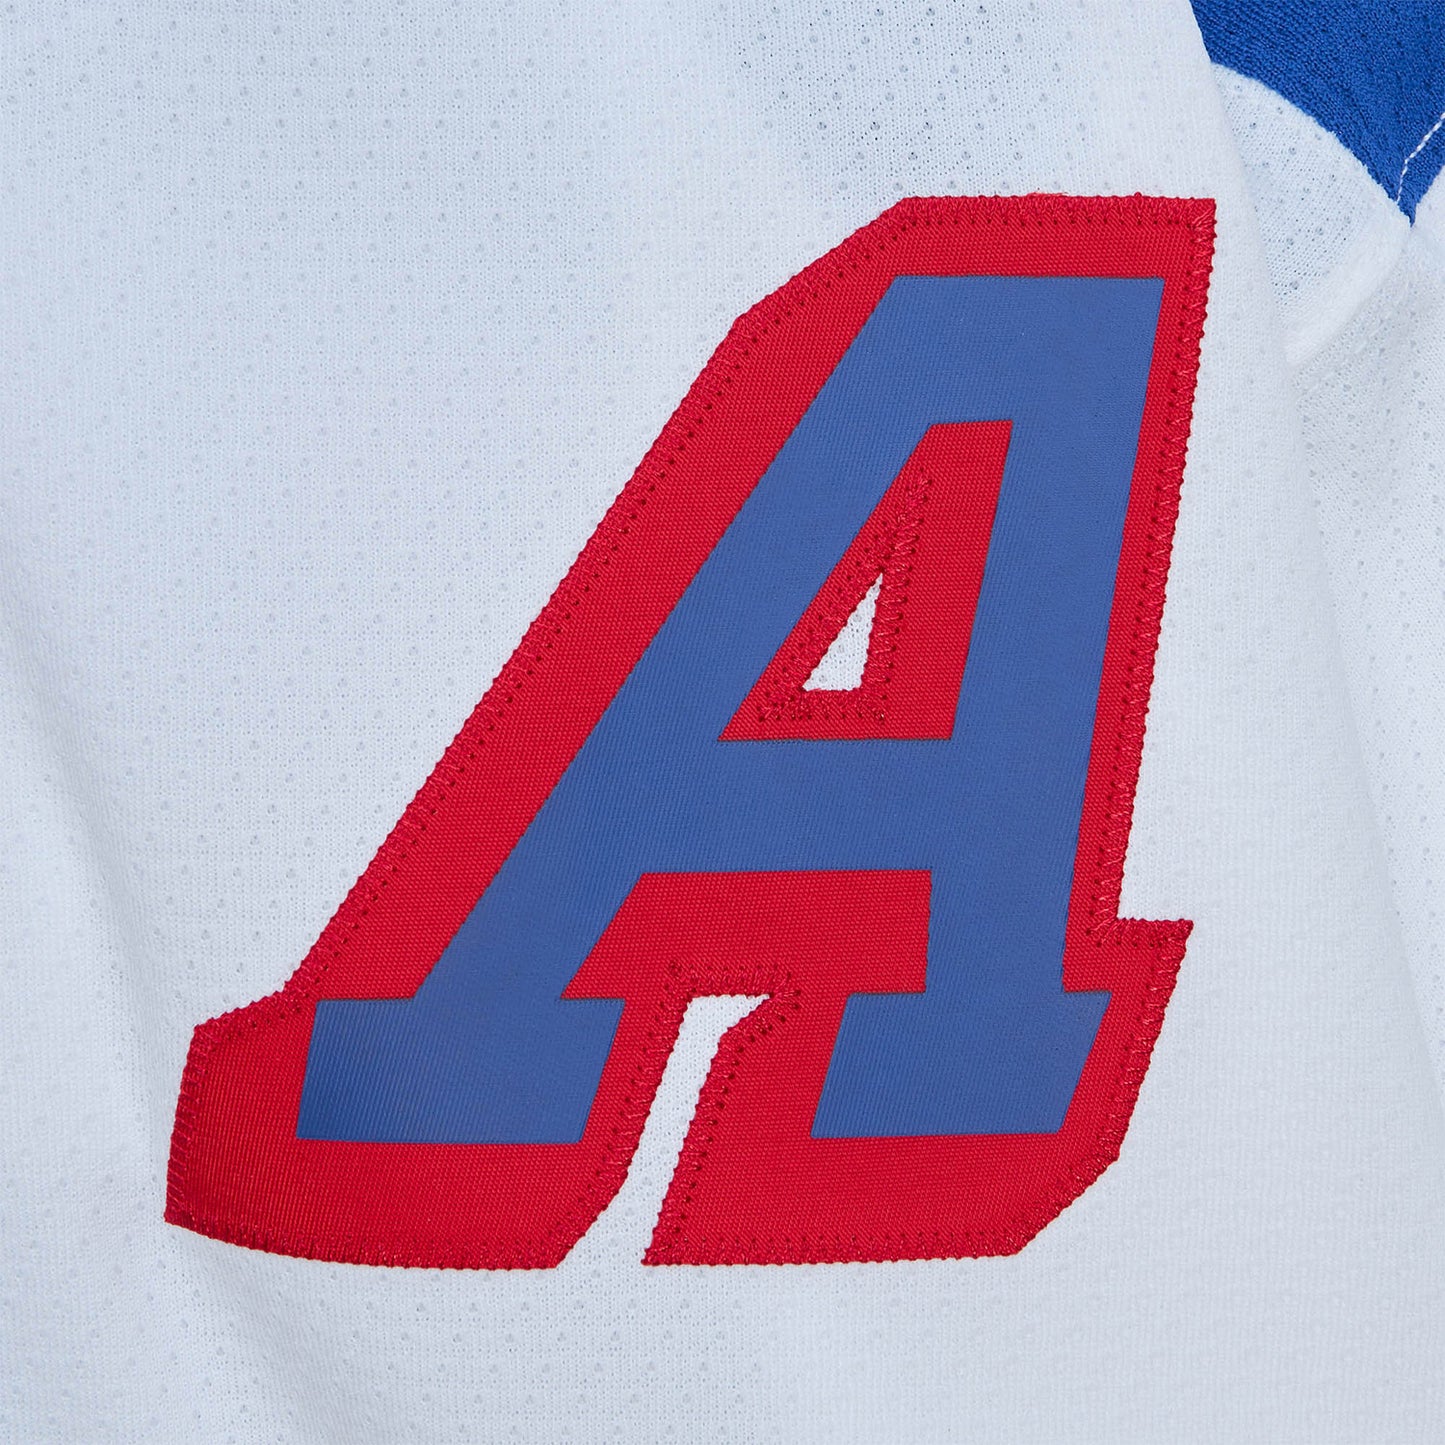 Mitchell & Ness Rangers Brian Leetch 1993 Road Jersey In White - Zoom View On Alternate's "A"